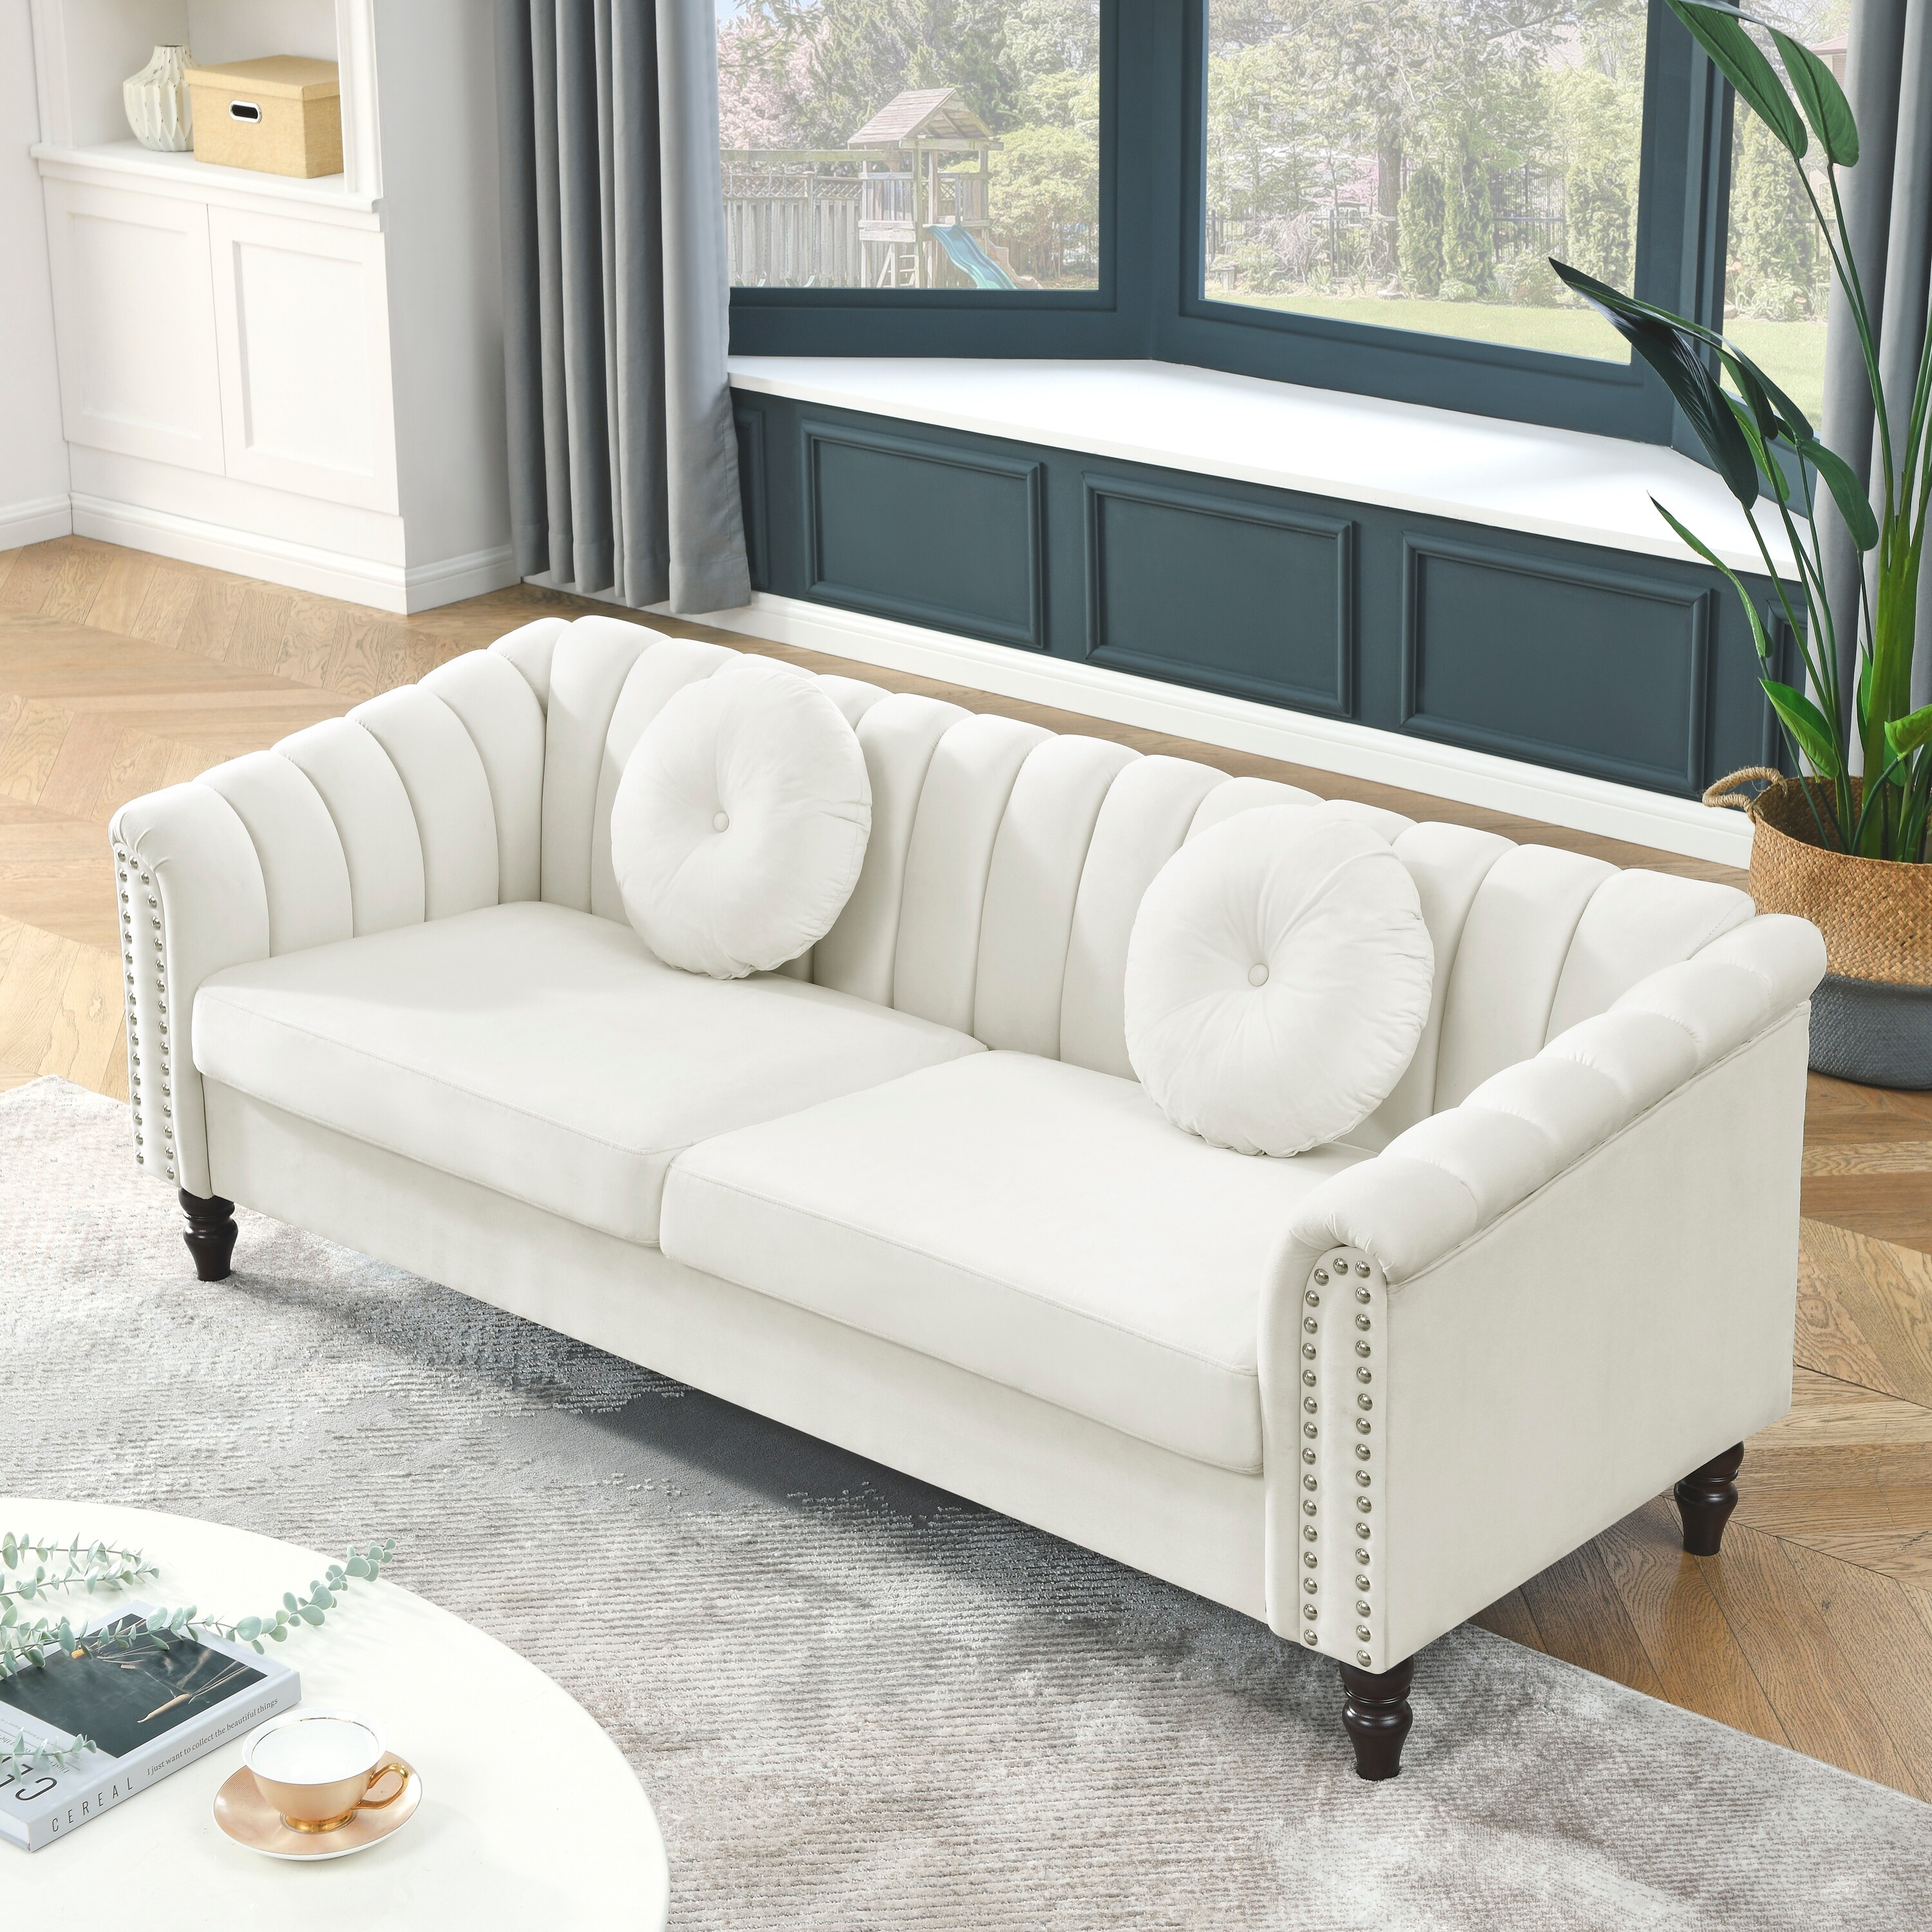 Wood Modern Velvet Upholstered Outdoor Sofa Couch with Beige Cushions, 3 Seat Tufted Back with Nail Arms with 2 Pillows